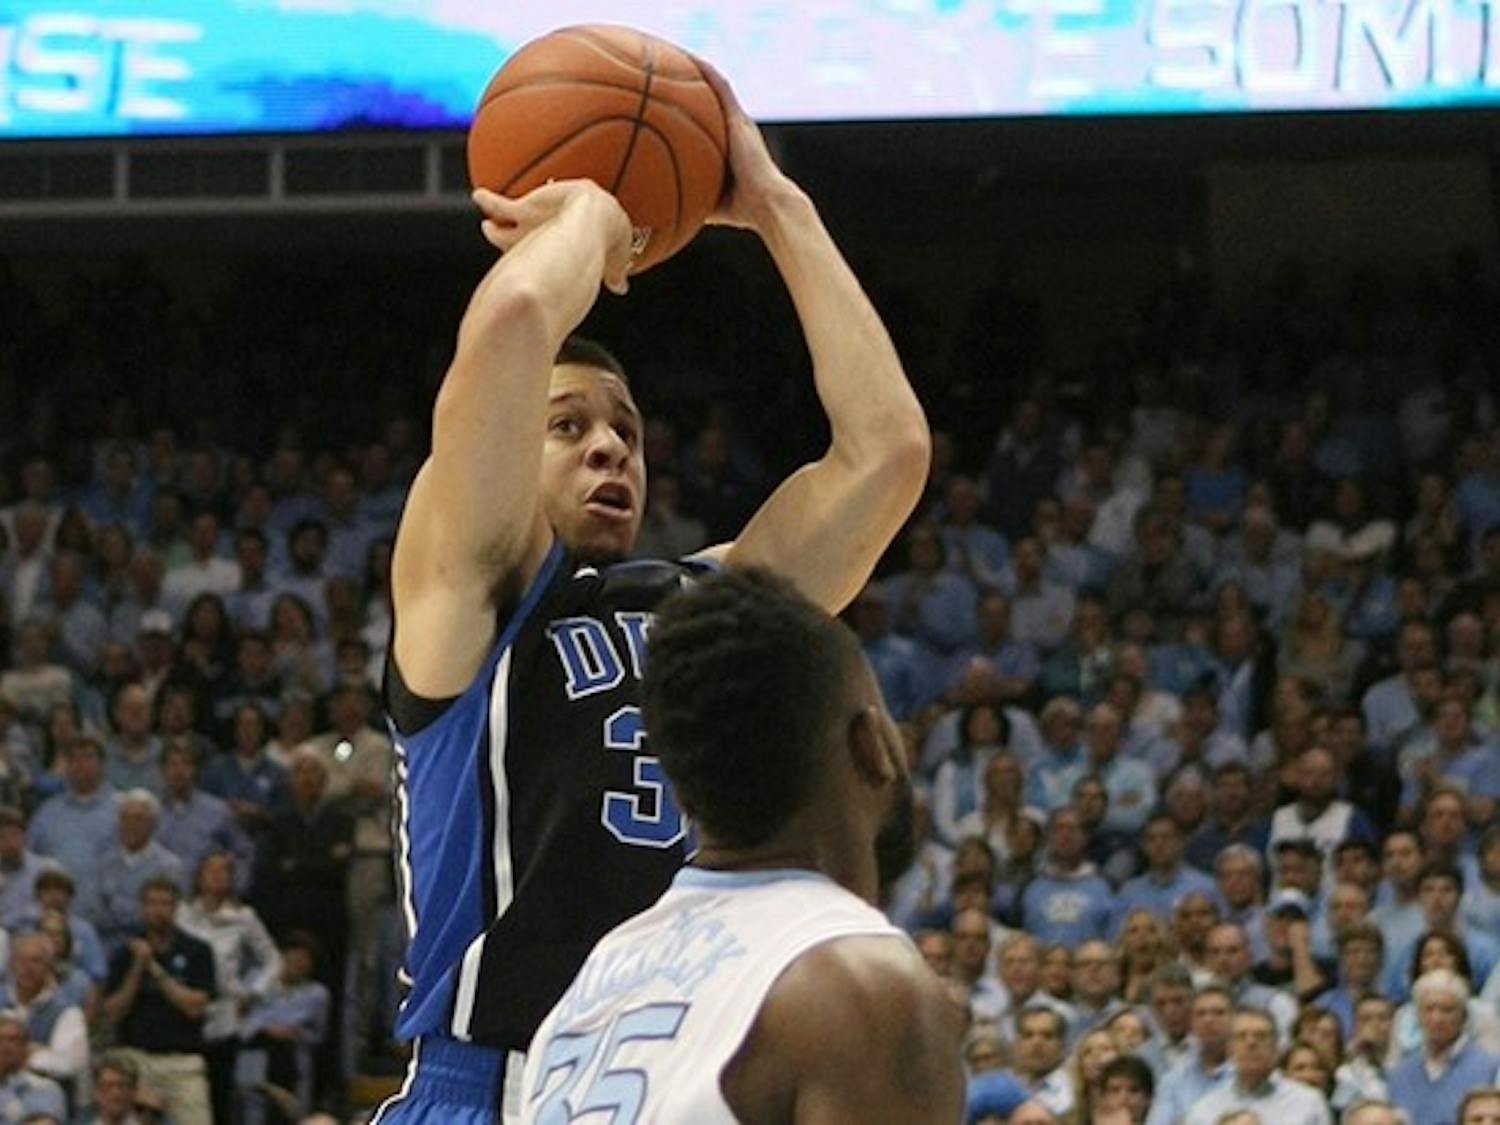 The No. 3 Duke men's basketball team defeated UNC 69-53 in their final game of the regular season. Seniors Mason Plumlee and Seth Curry led the Blue Devils with 23 and 20 points, respectively.